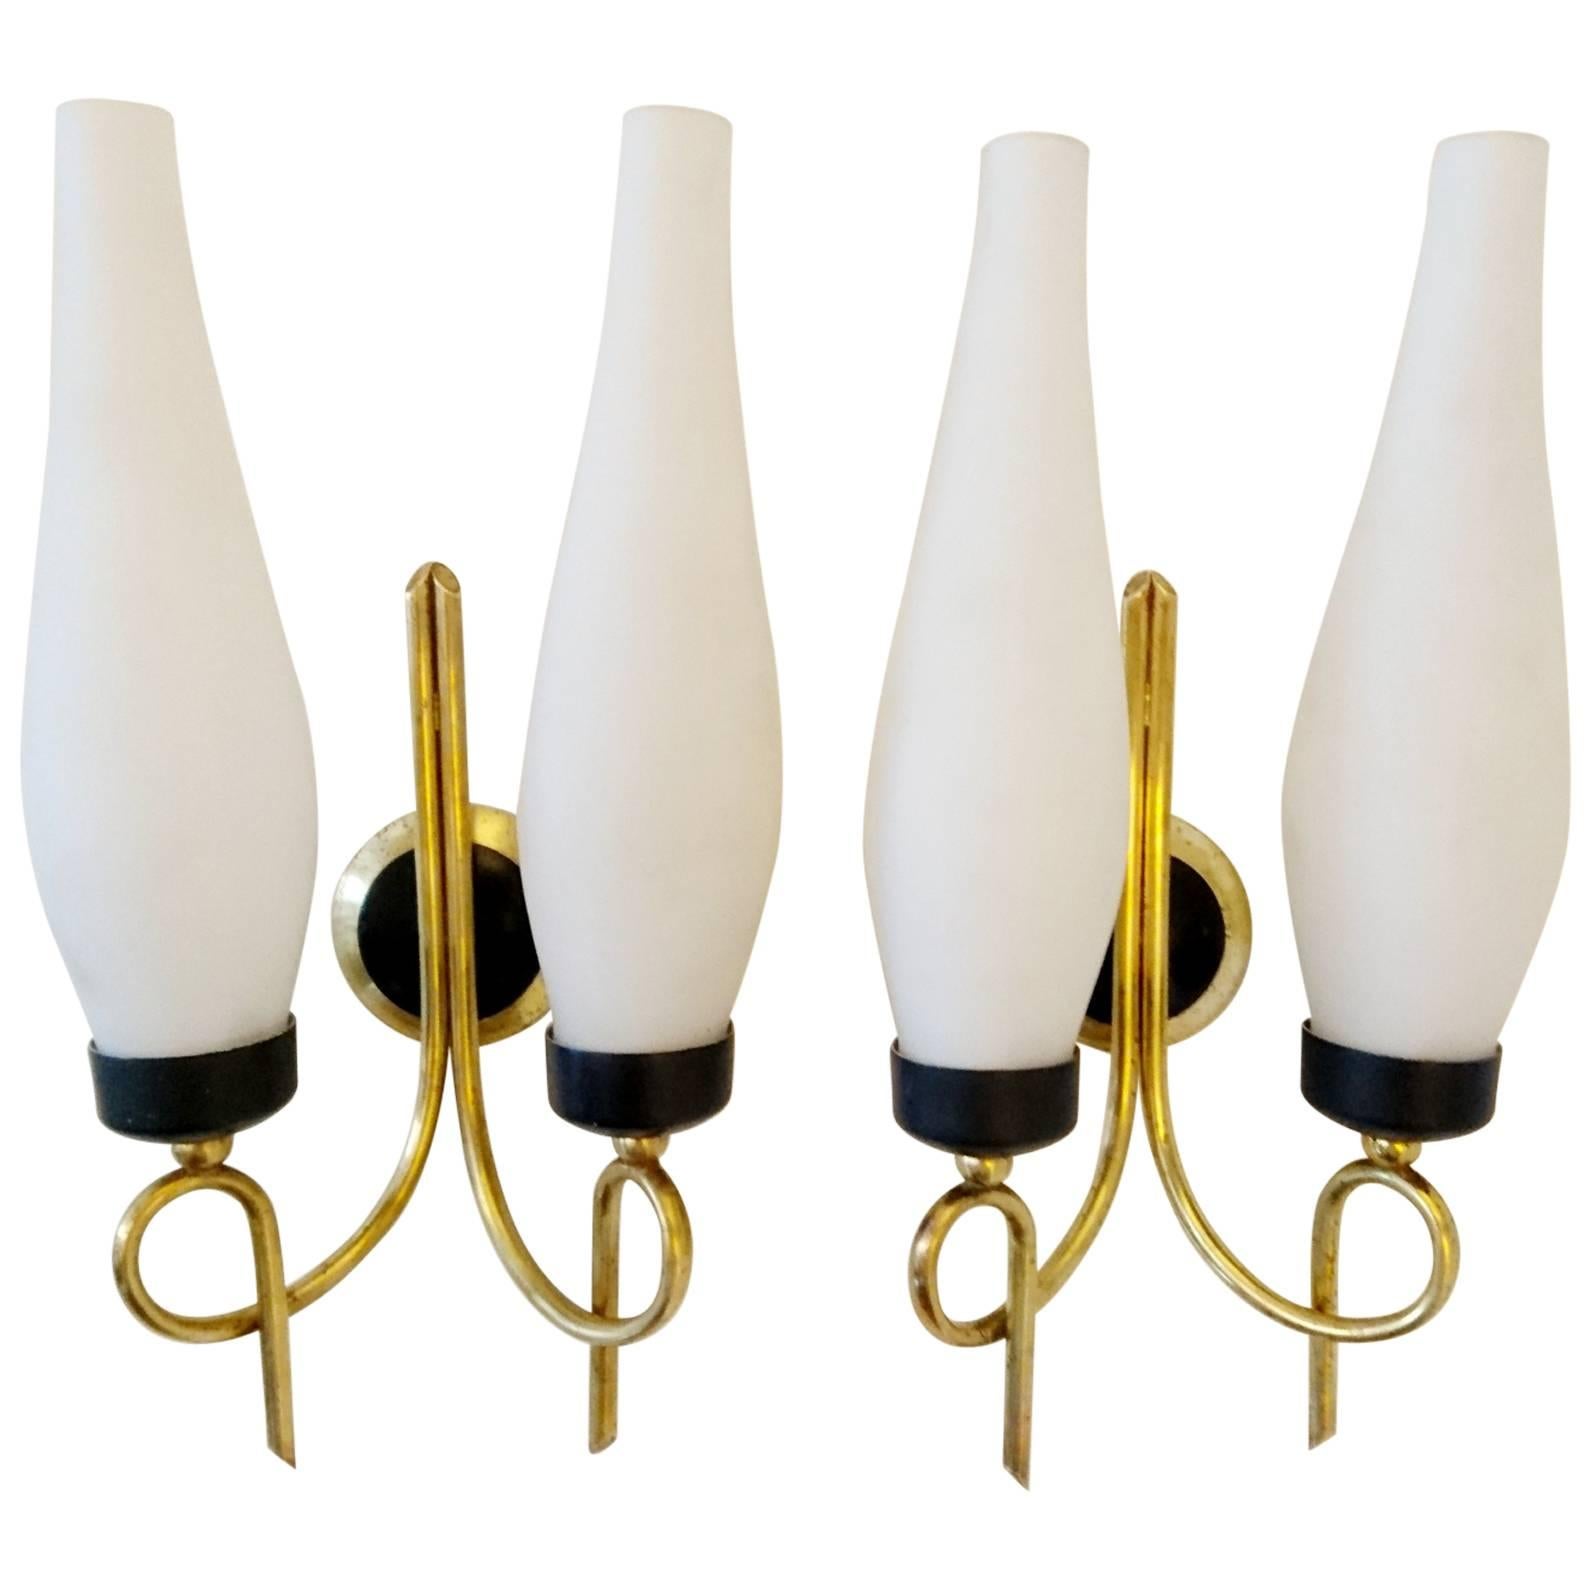 Pair of Italian 1950s Sconces with Opaque Glass